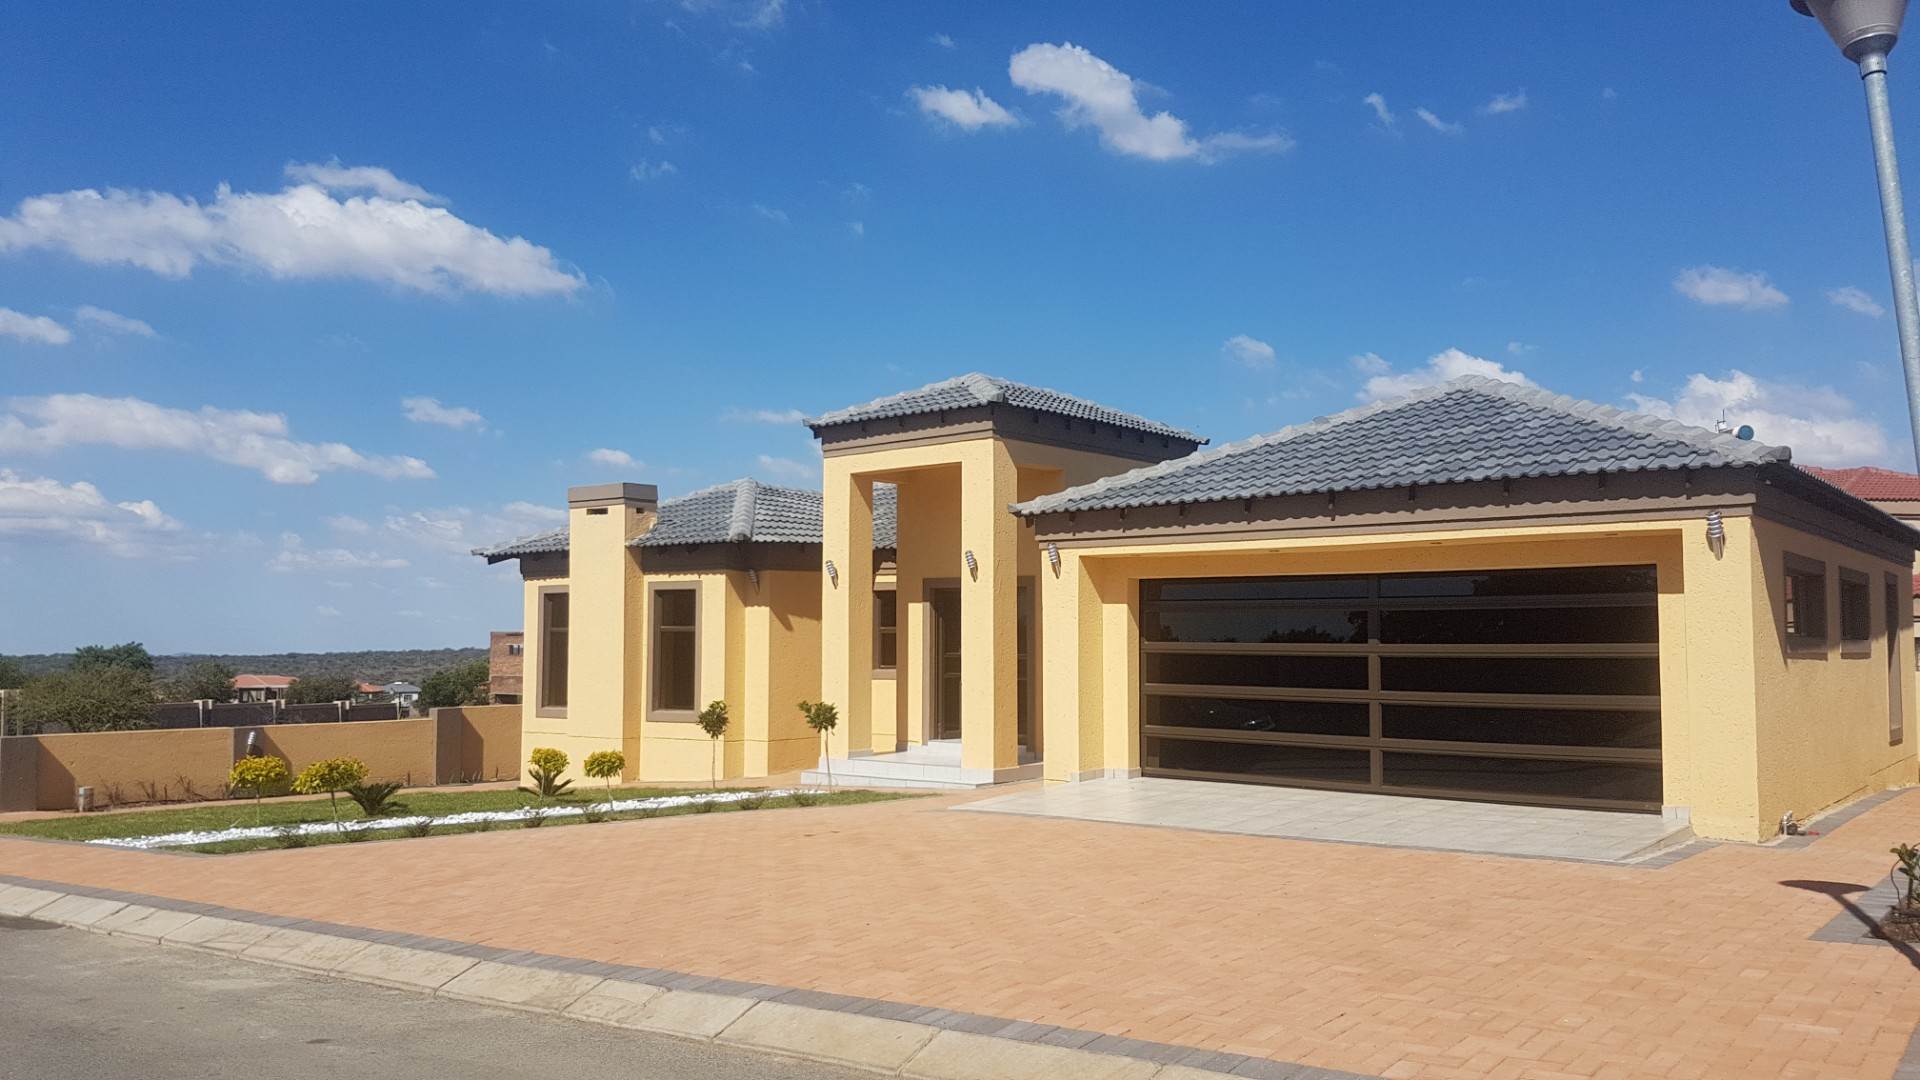 shop last year: Limpopo Houses Images